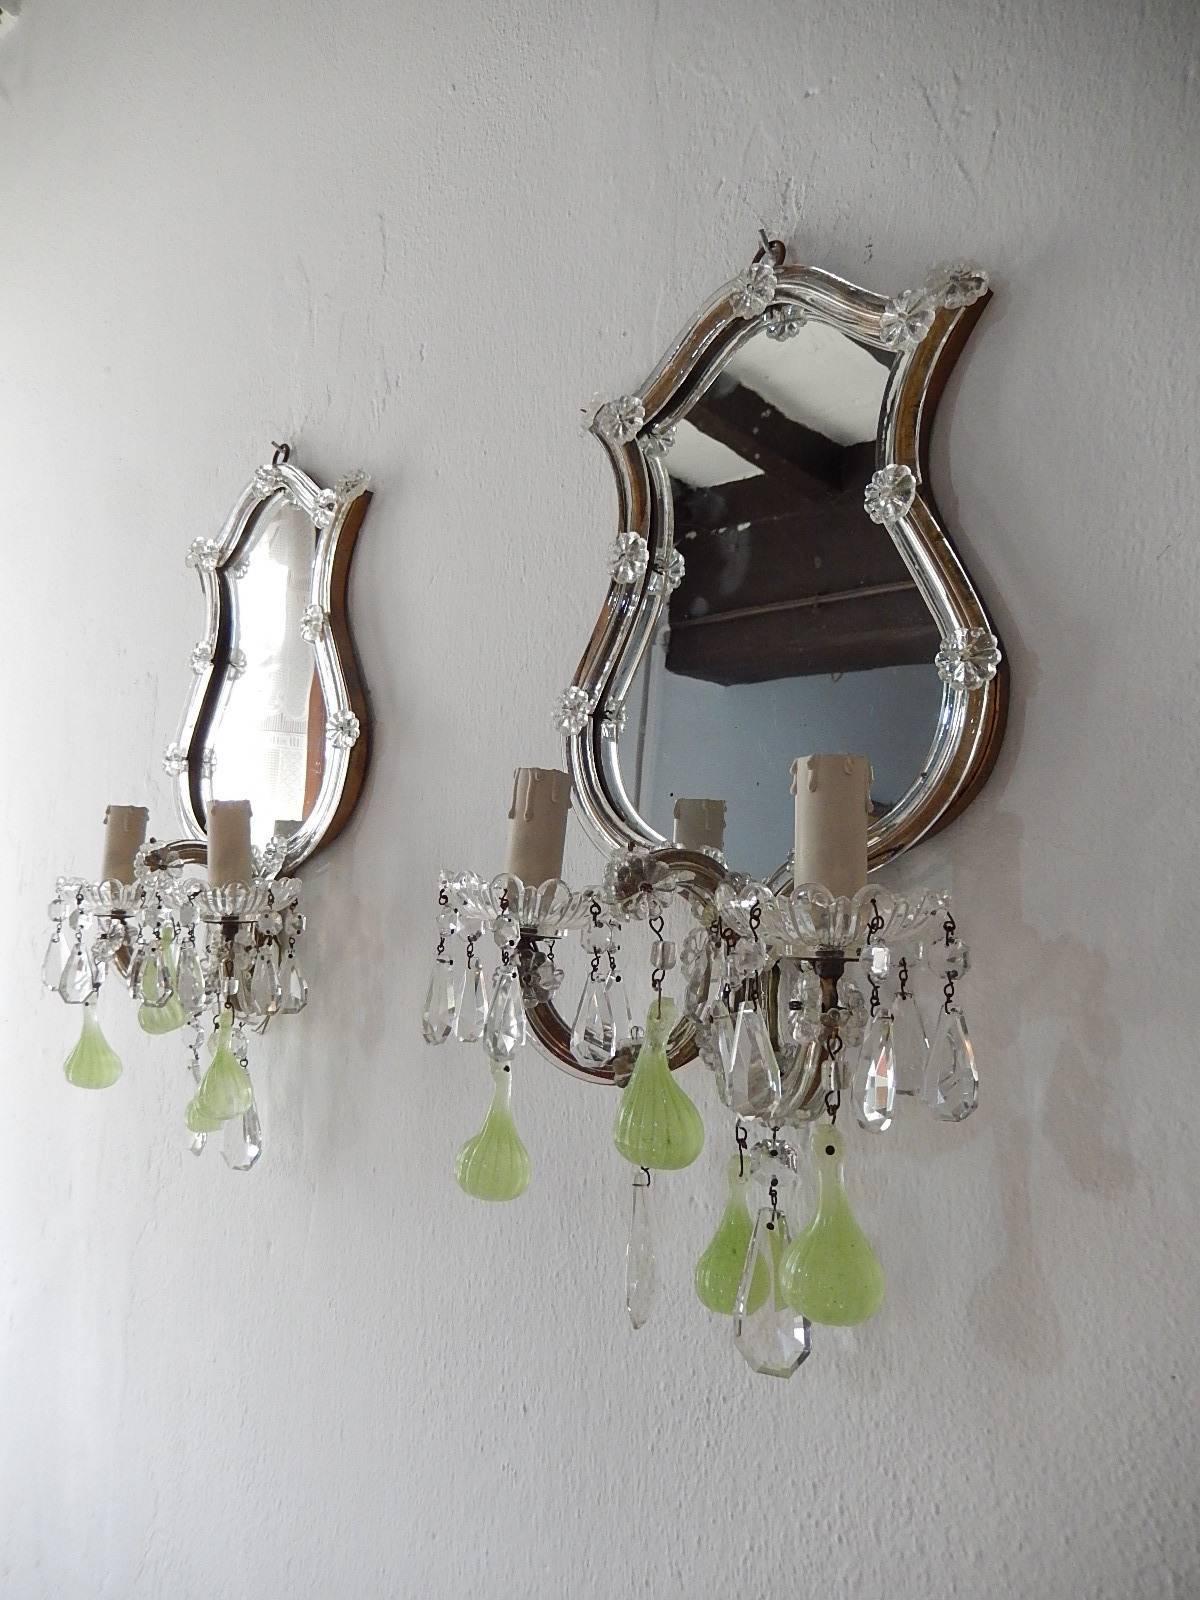 This set consists of four sconces, two with mirrors and two without. I have the matching nine-light chandelier as well. Gilt metal with Murano blown glass covering. Adorning rare chartreuse figs throughout and crystal prisms. The smaller sconces